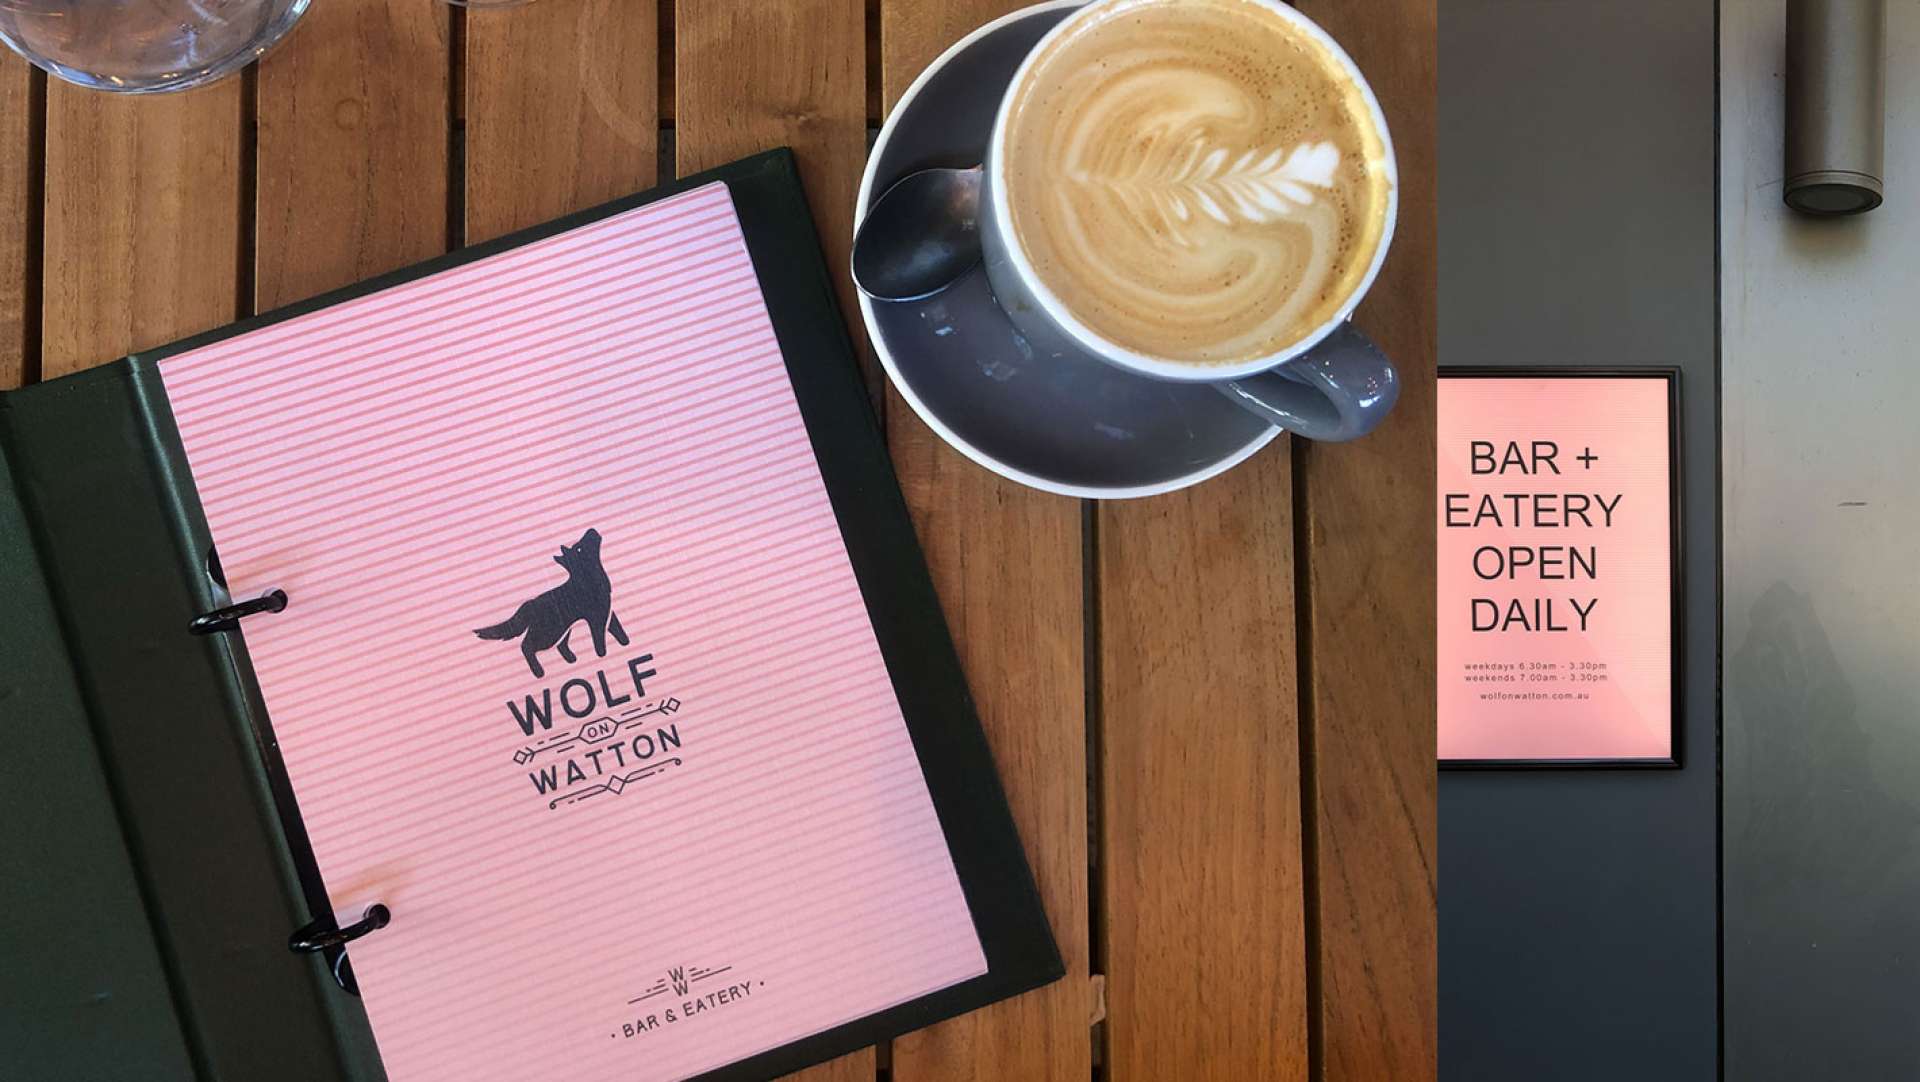 Wolf On Watton opens in Werribee destined for greatness